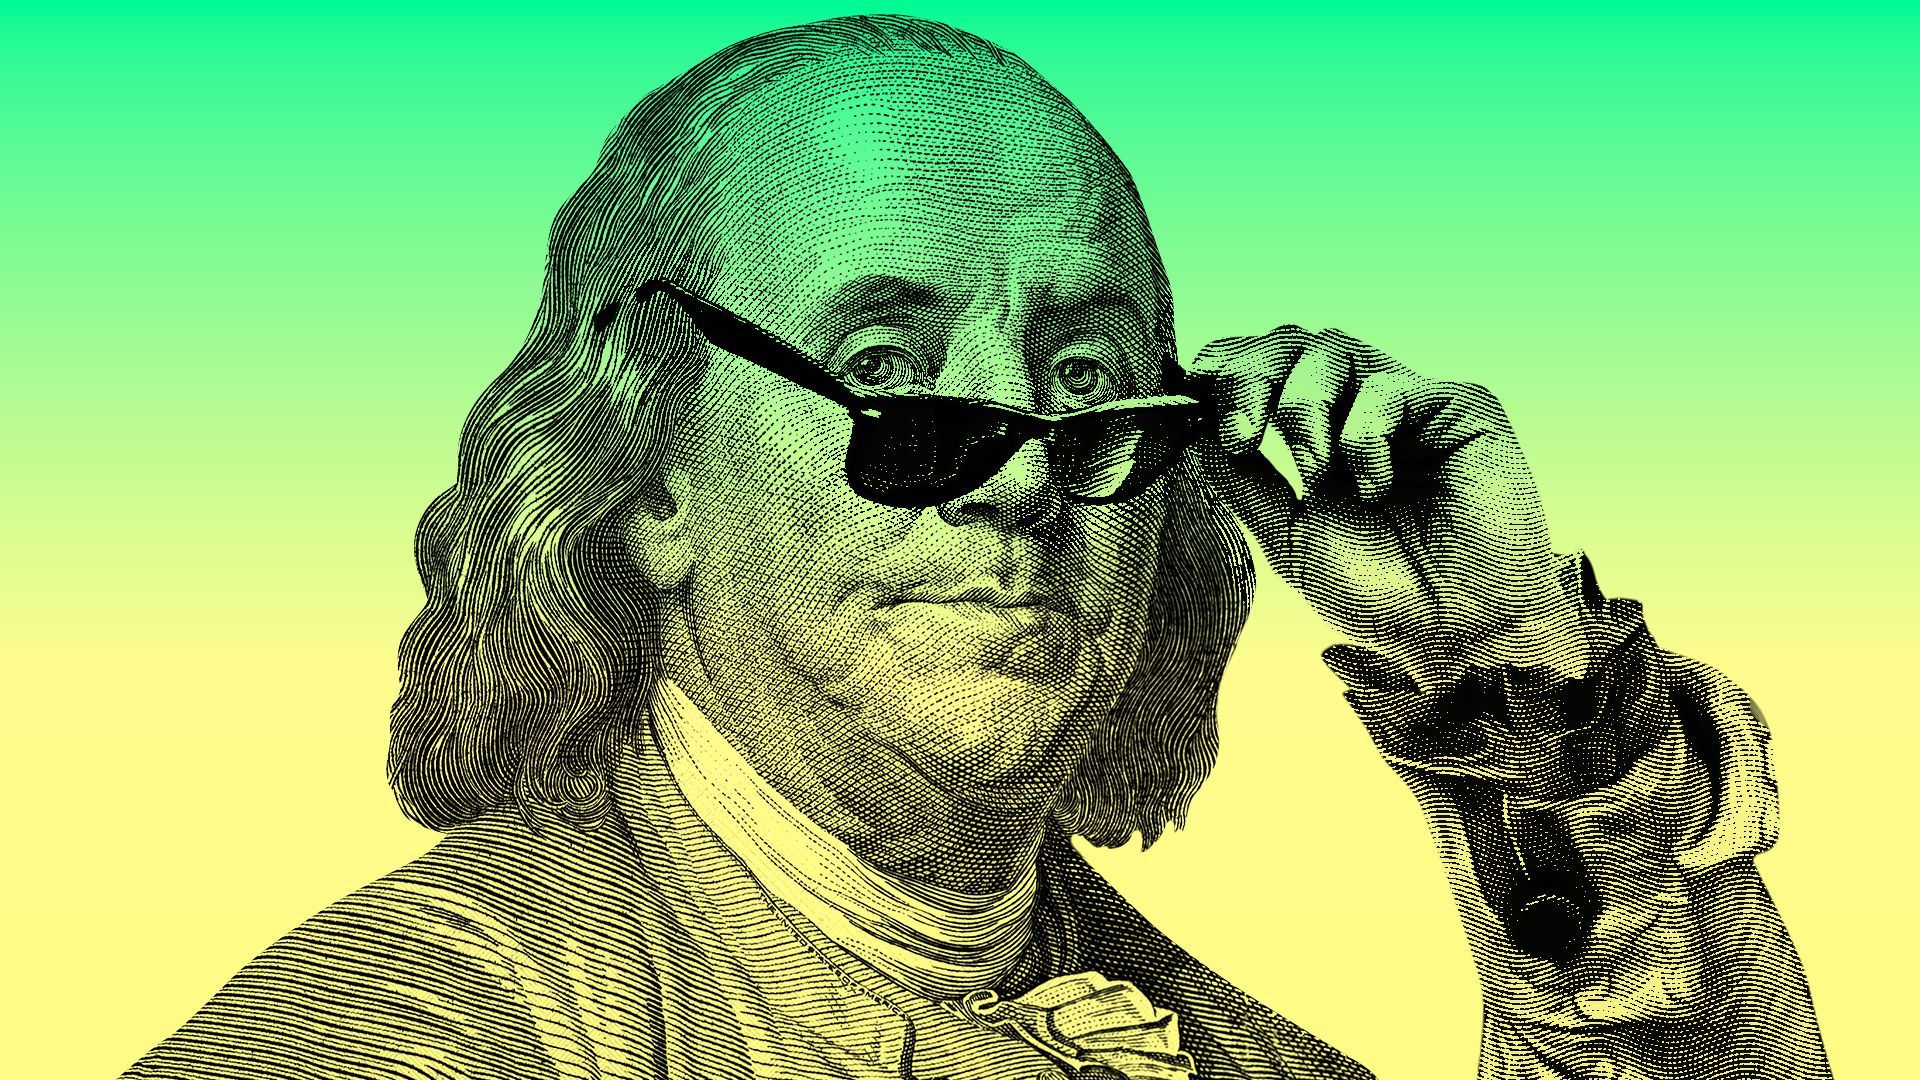 Illustration of Benjamin Franklin pulling down a pair of shades and looking over the rim.